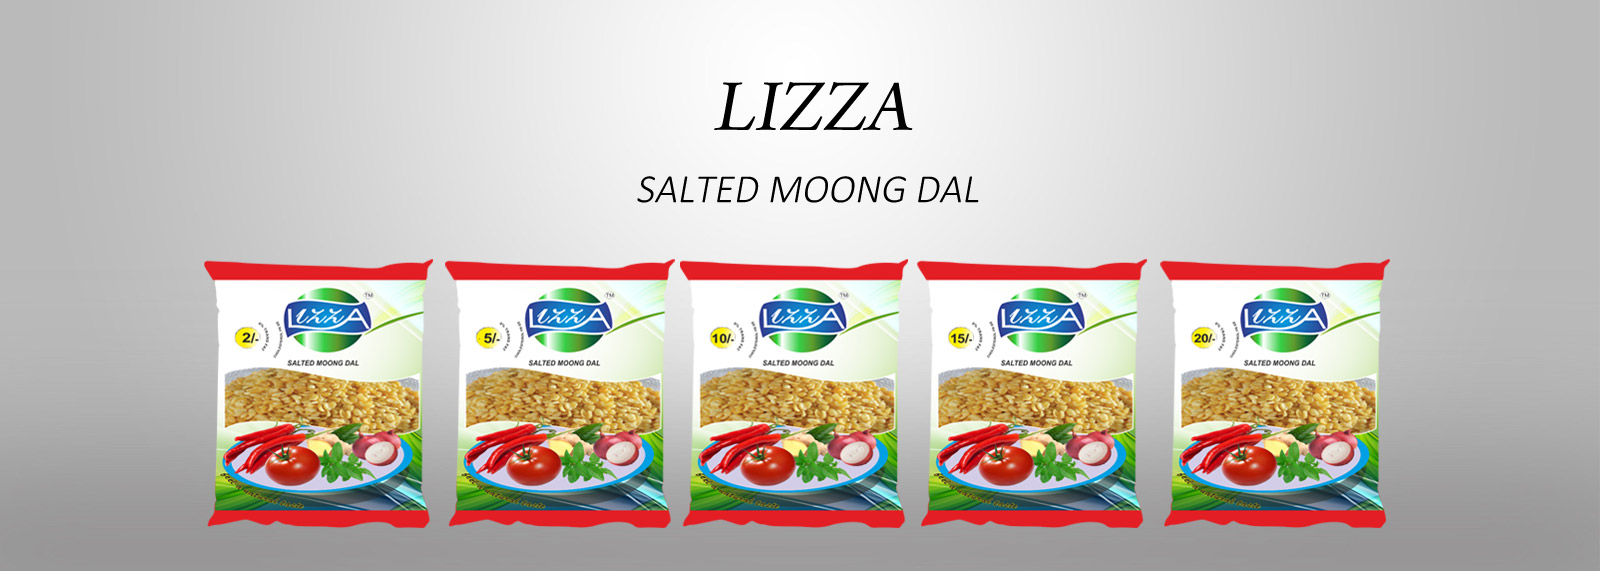 Lizza salted mung daal